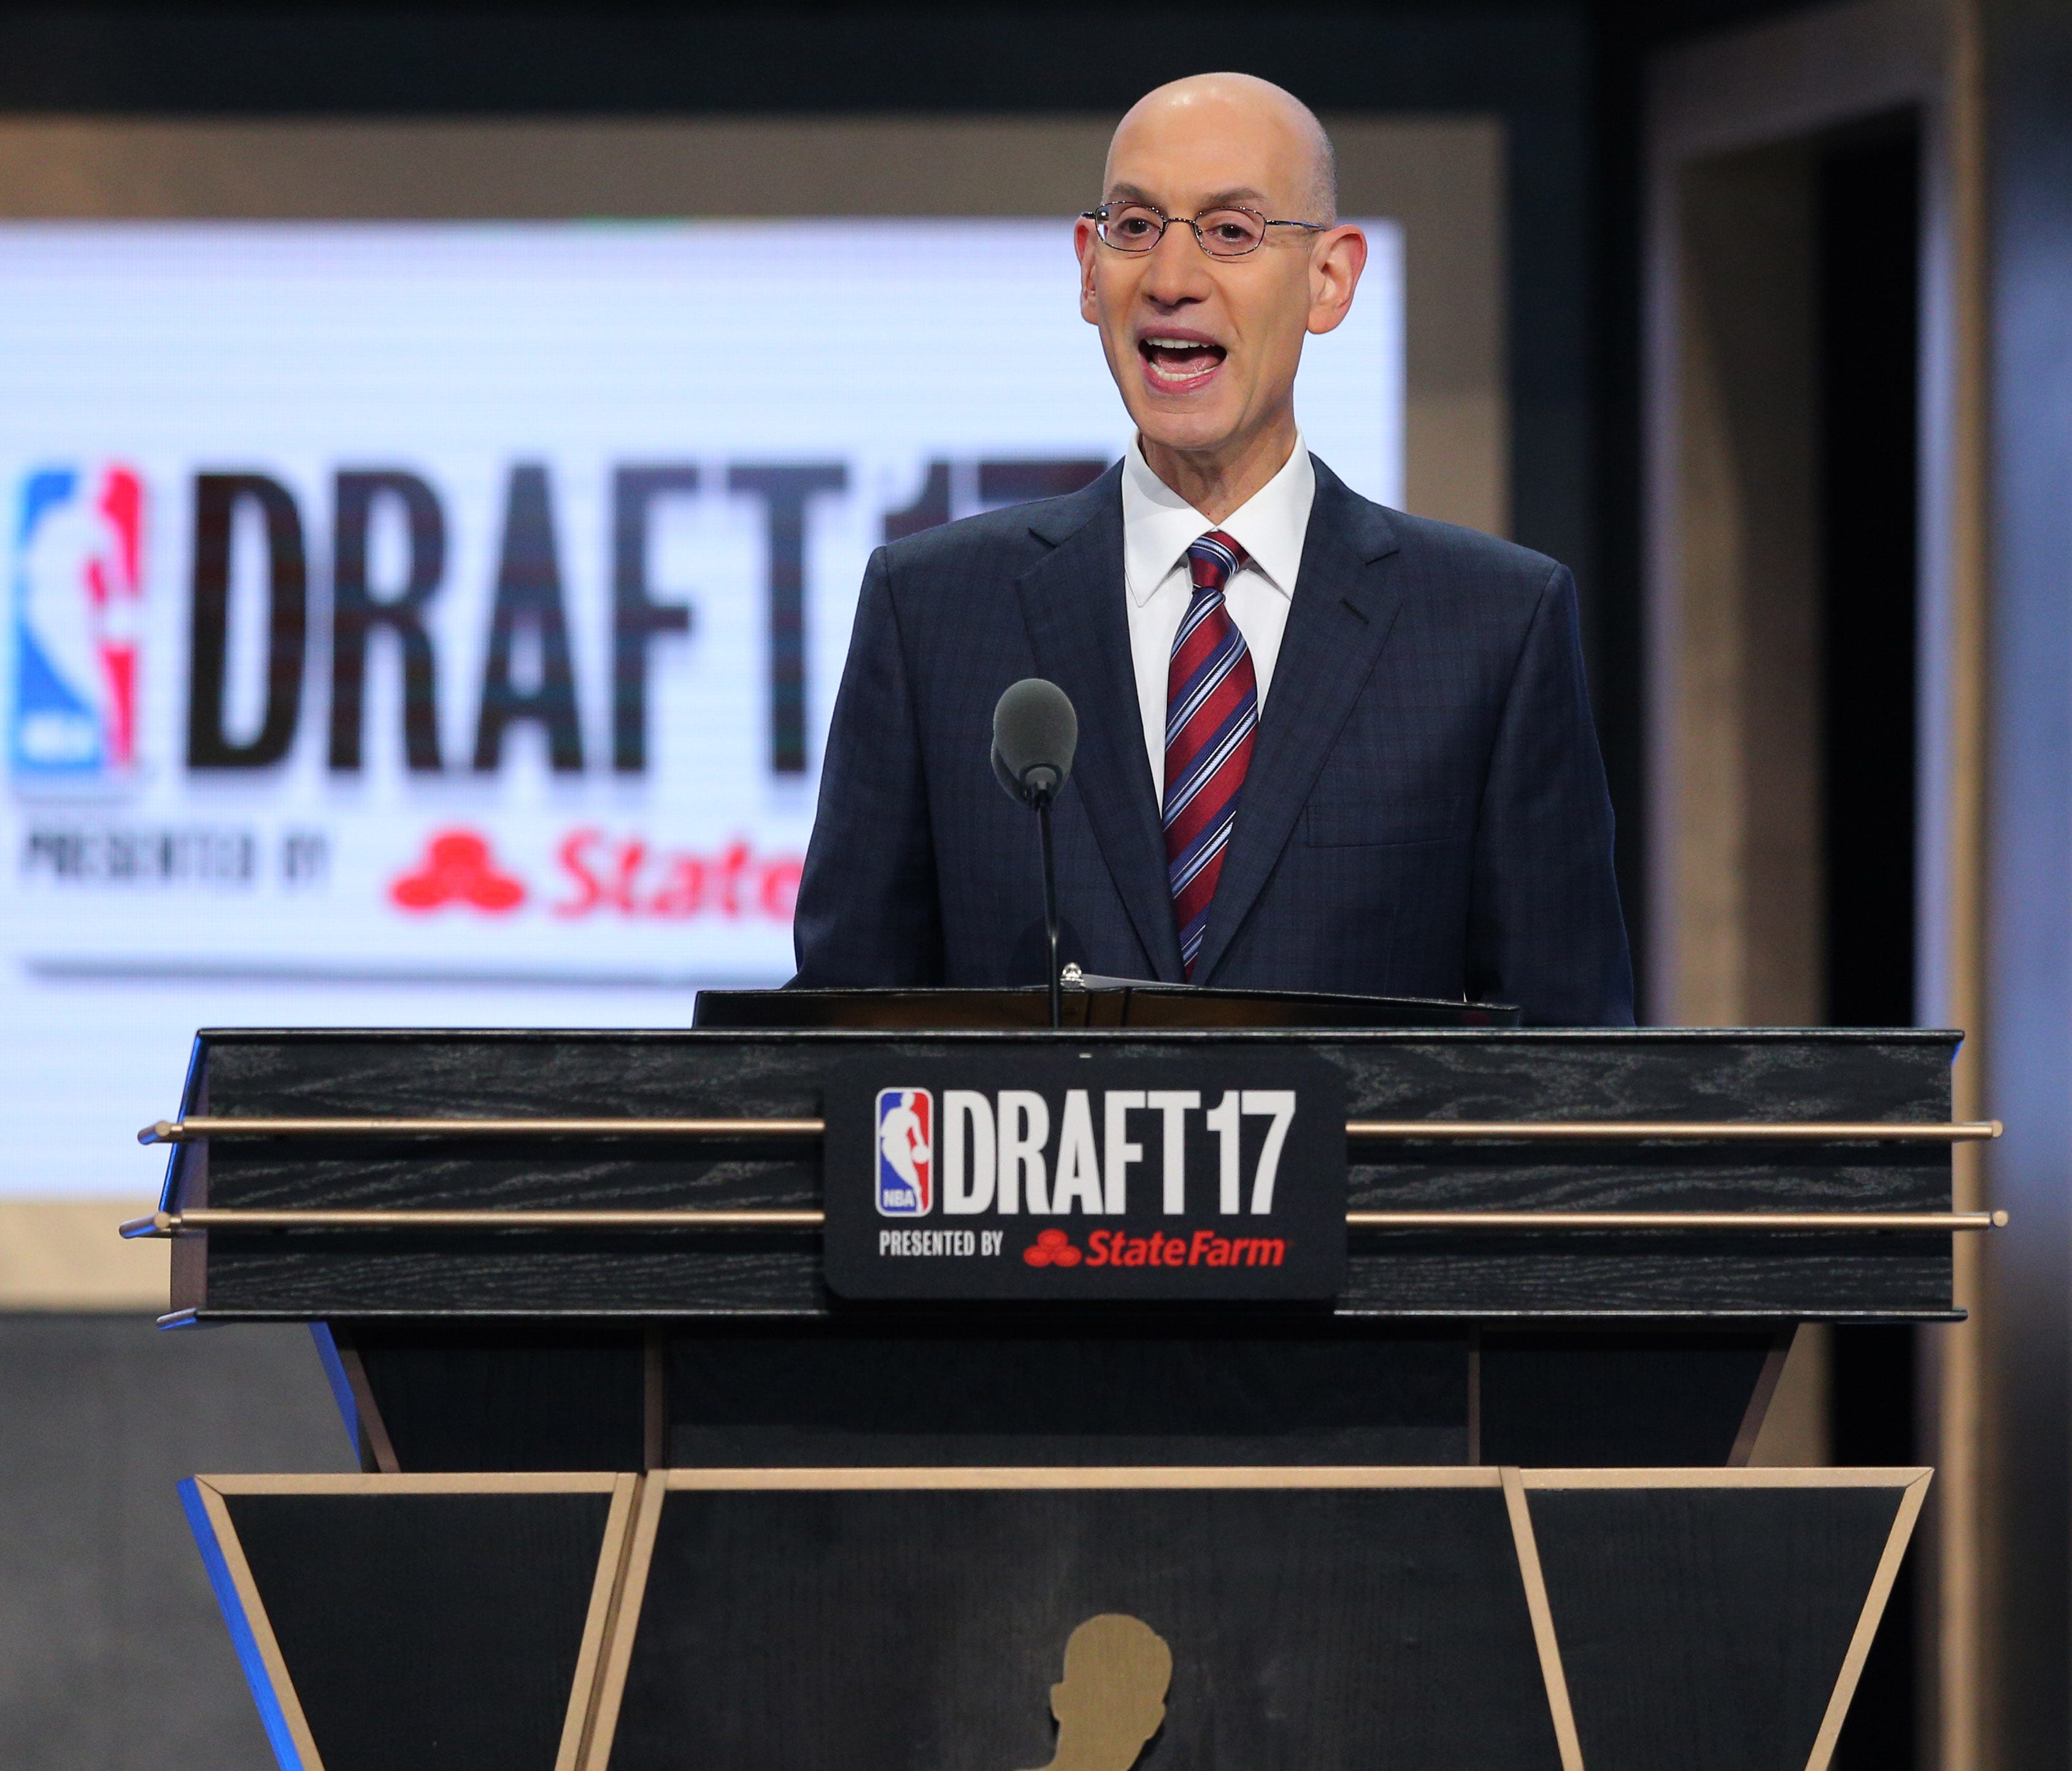 NBA commissioner Adam Silver speaks before the first round of the 2017 NBA Draft at Barclays Center.